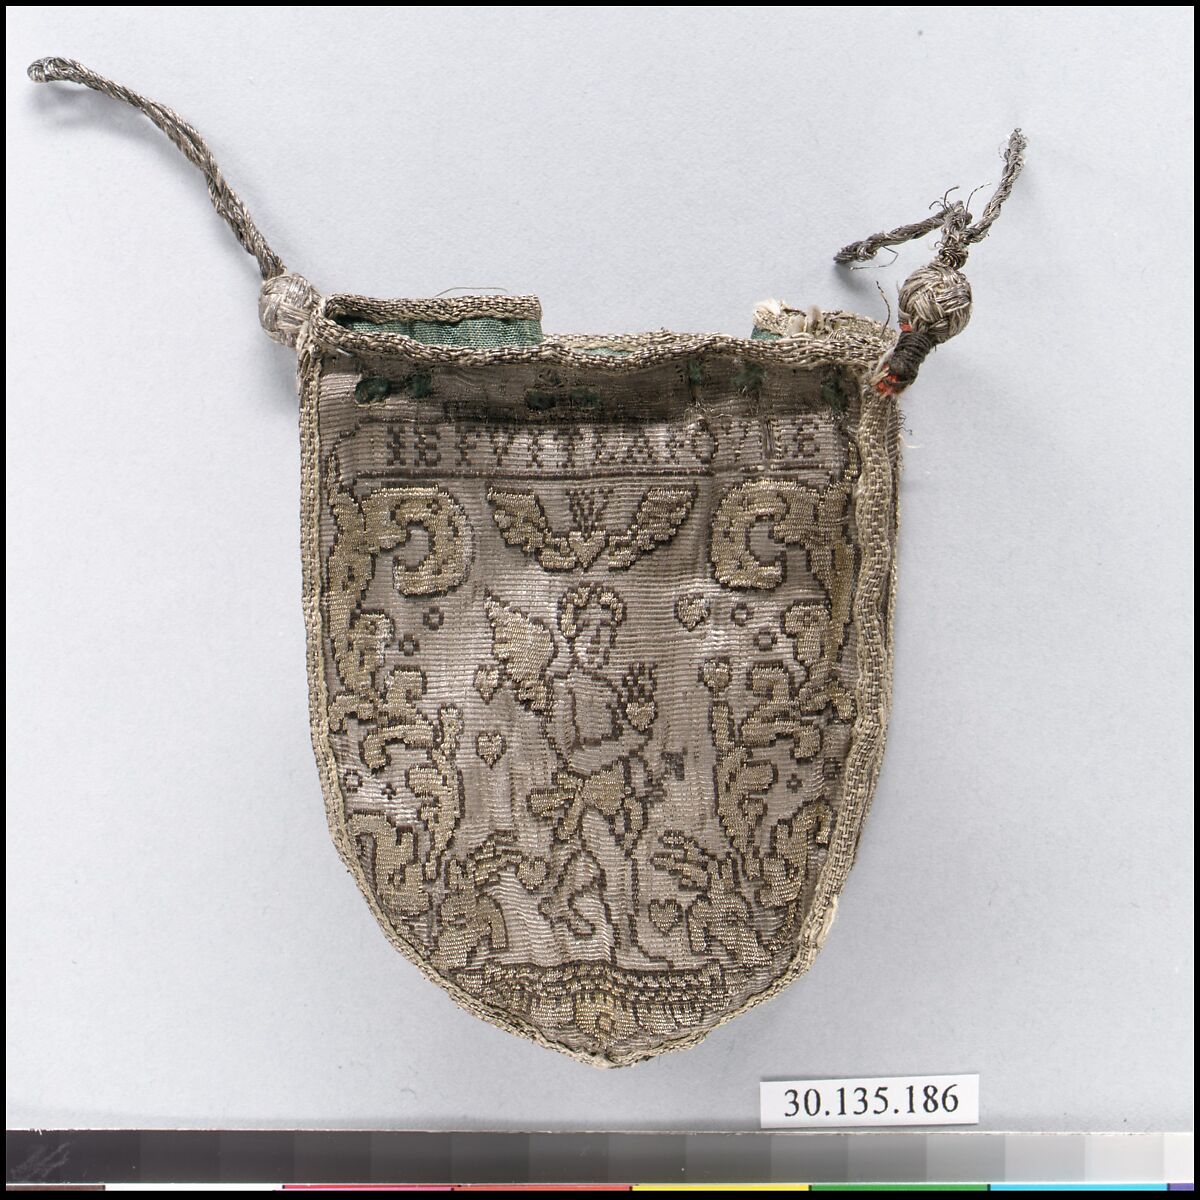 Bag, Silk and metal thread, French 